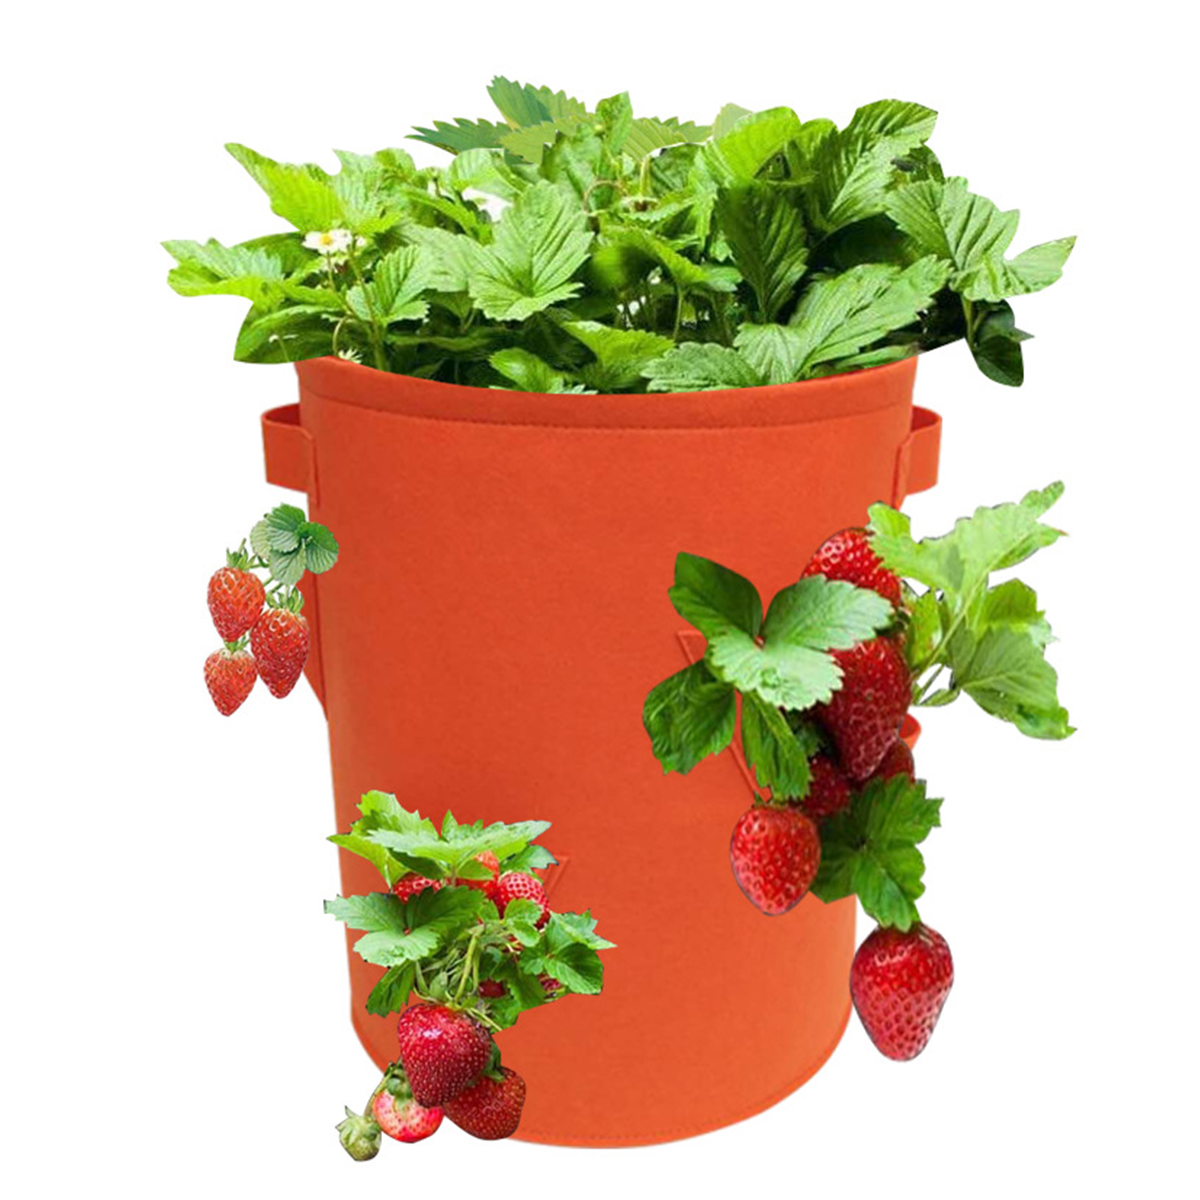 5710-Gallon-Strawberry-Planting-Grow-Bag-Plant-Bags-with-368-Side-Pockets-1751911-10